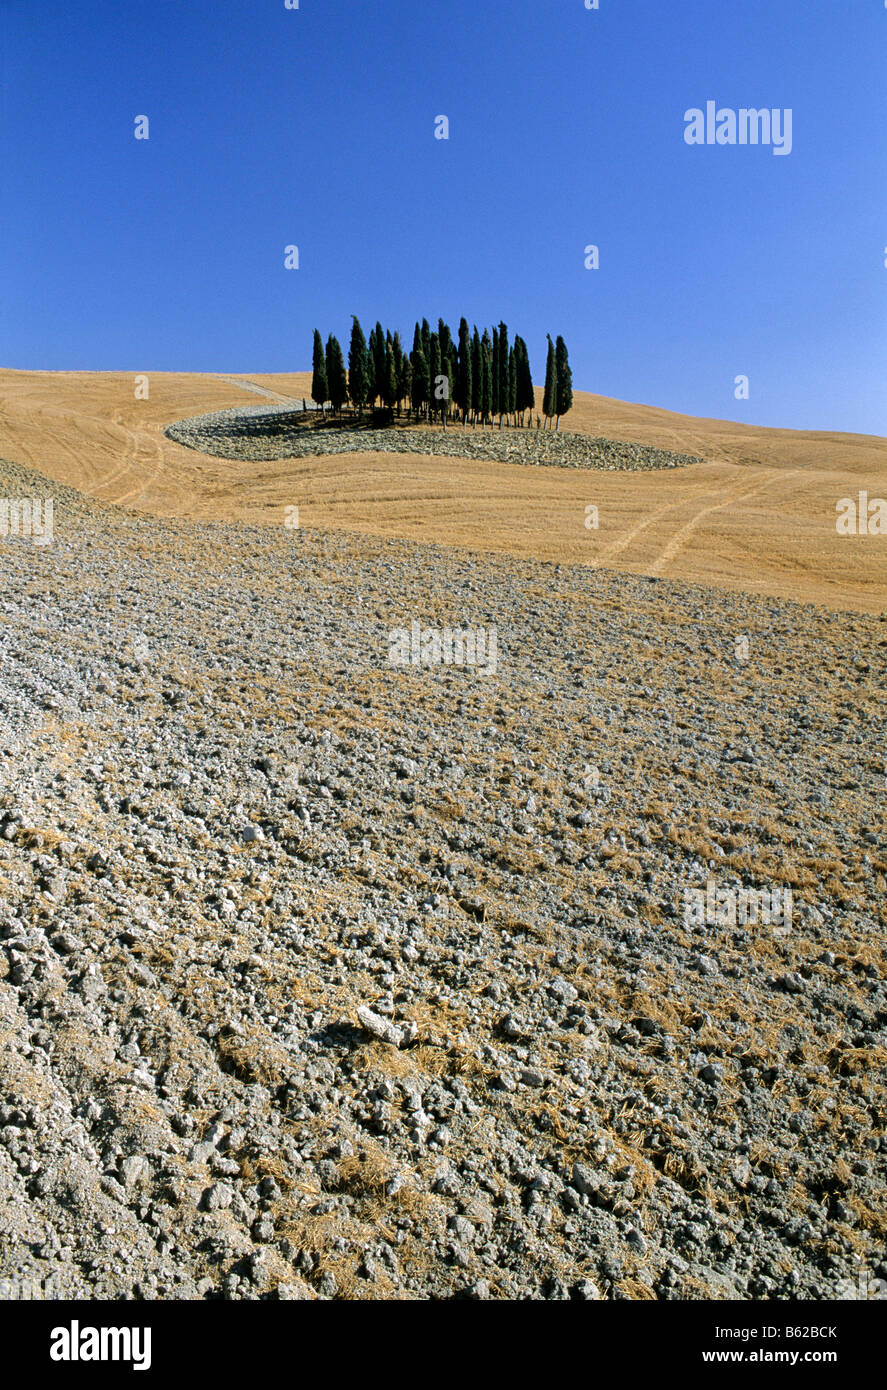 Harvested wheat fields, ploughed field and cypress trees, landscape near Montalcino, Province of Siena, Toscany, Italy, Europe Stock Photo